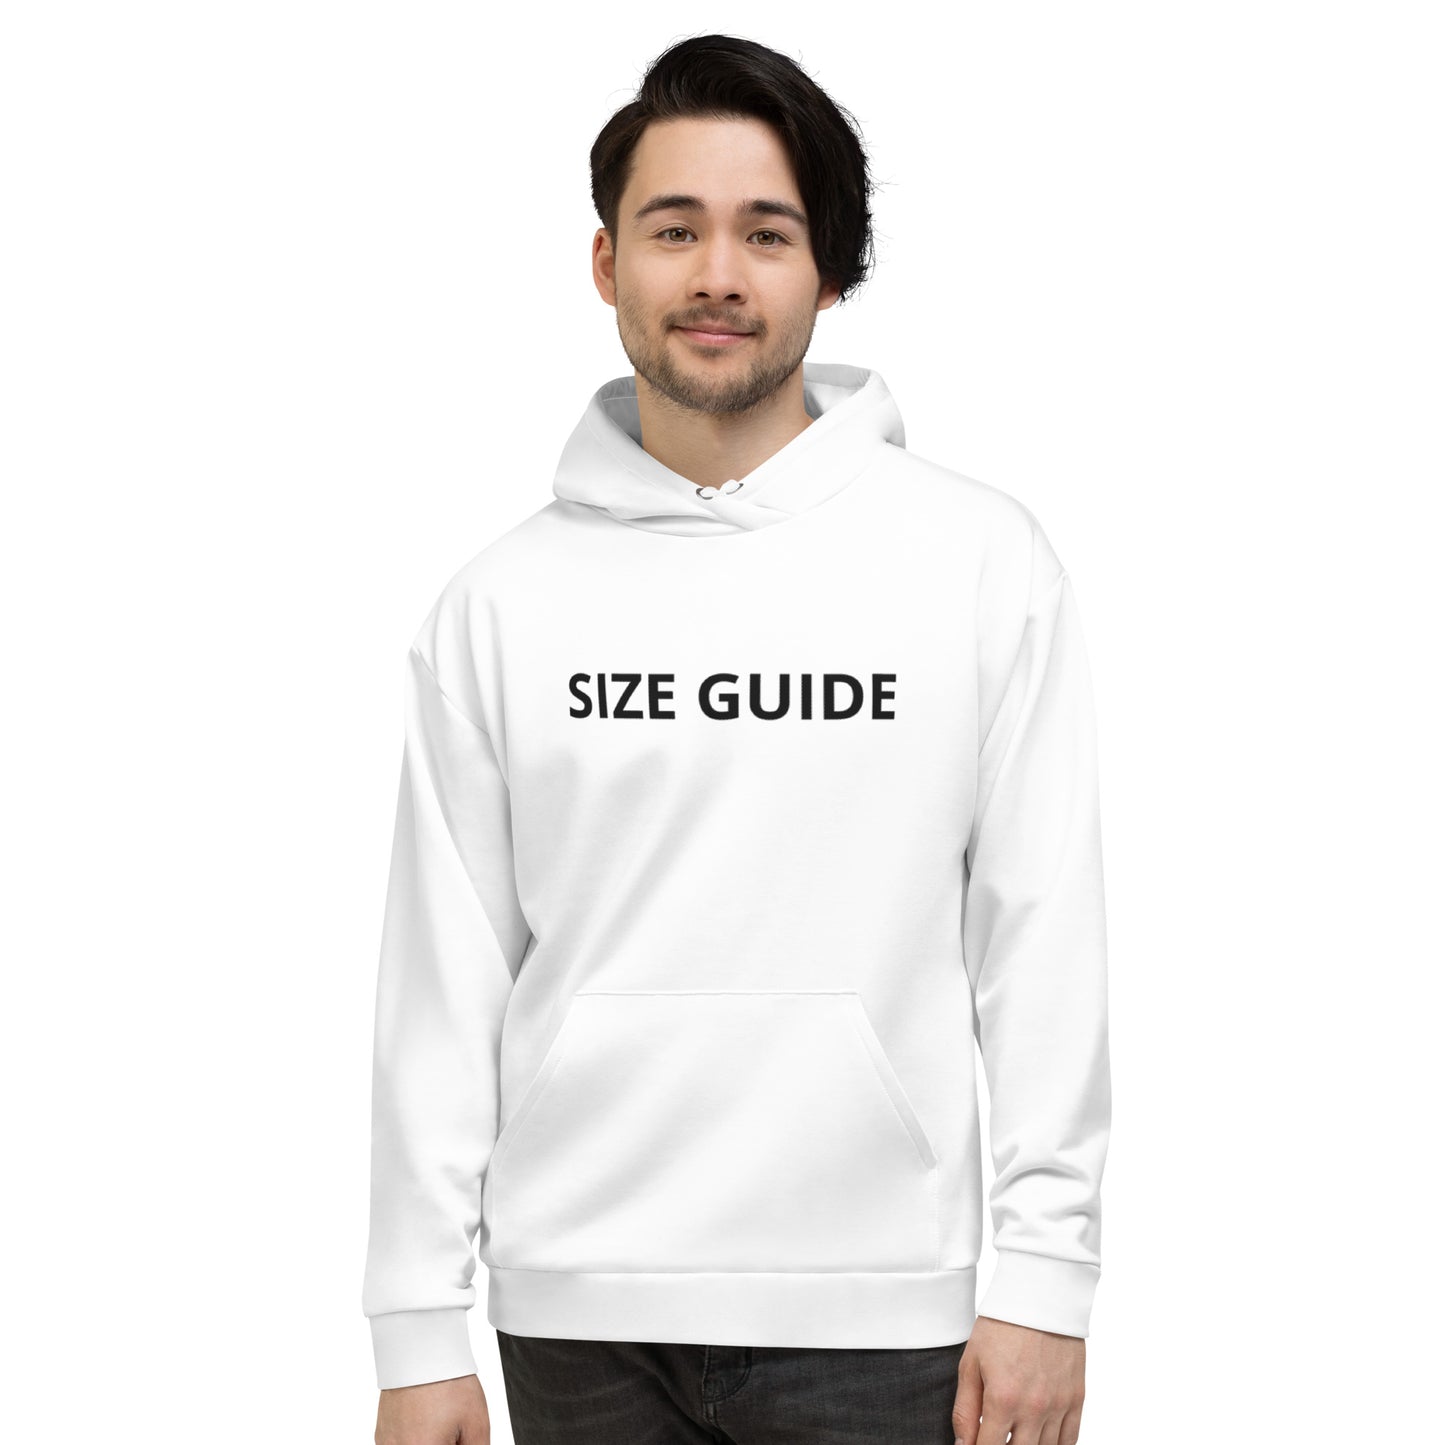 SIZE GUIDE Unisex Hoodie